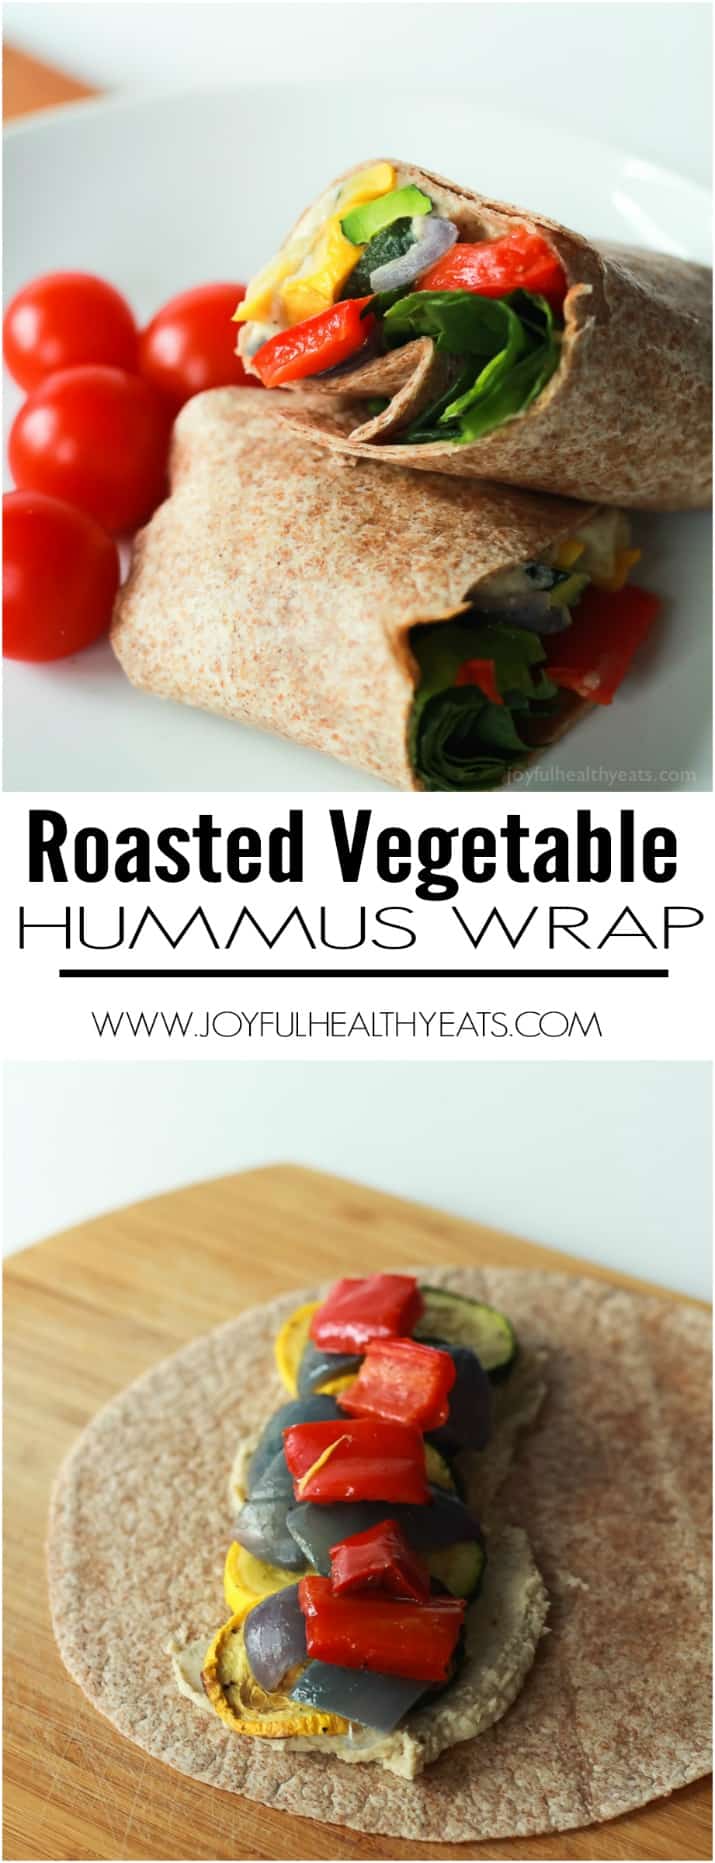 Healthy + Easy Roasted Vegetable Wraps with a Roasted Garlic White Bean Hummus, this is seriously amazing! | www.joyfulhealthyeats.com #eathealthy #recipes